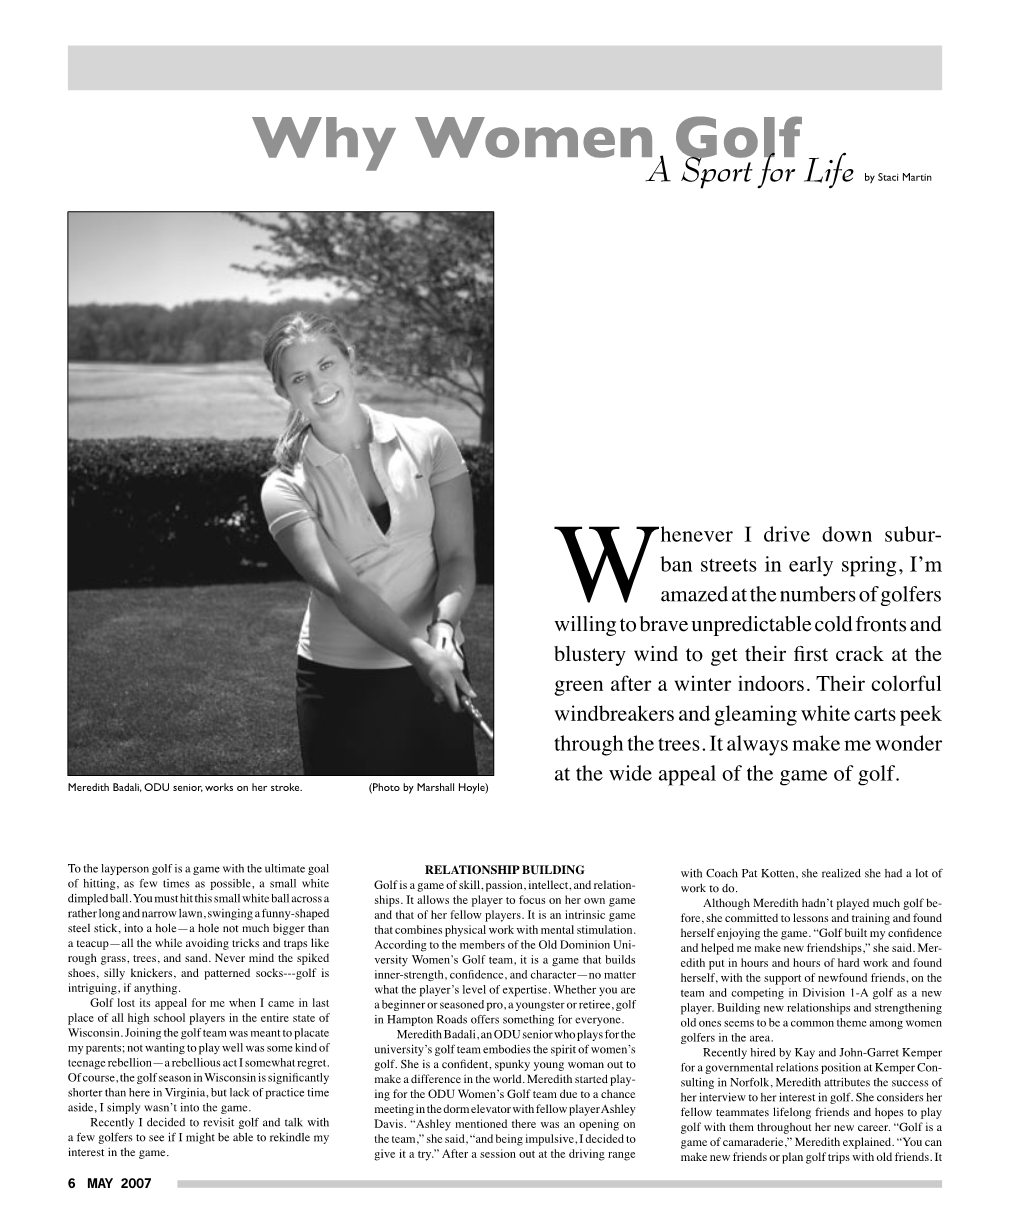 Why Women Golf a Sport for Life by Staci Martin